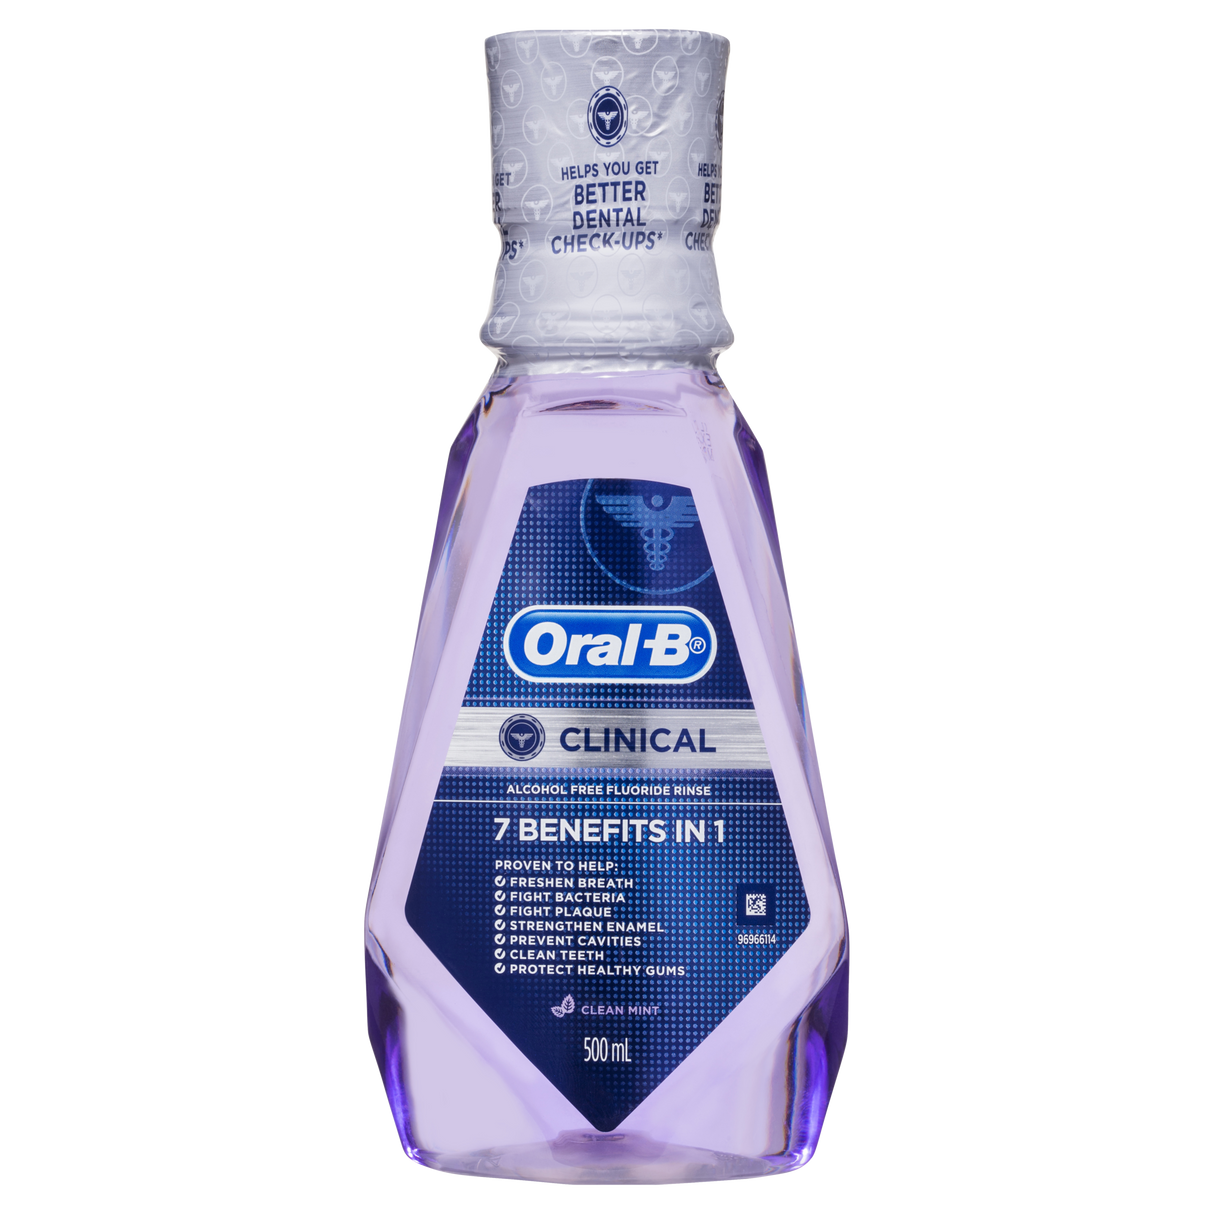 Oral-B Clinical Alcohol Free Flouride Rinse Mouthwash Clean Mint 500ml